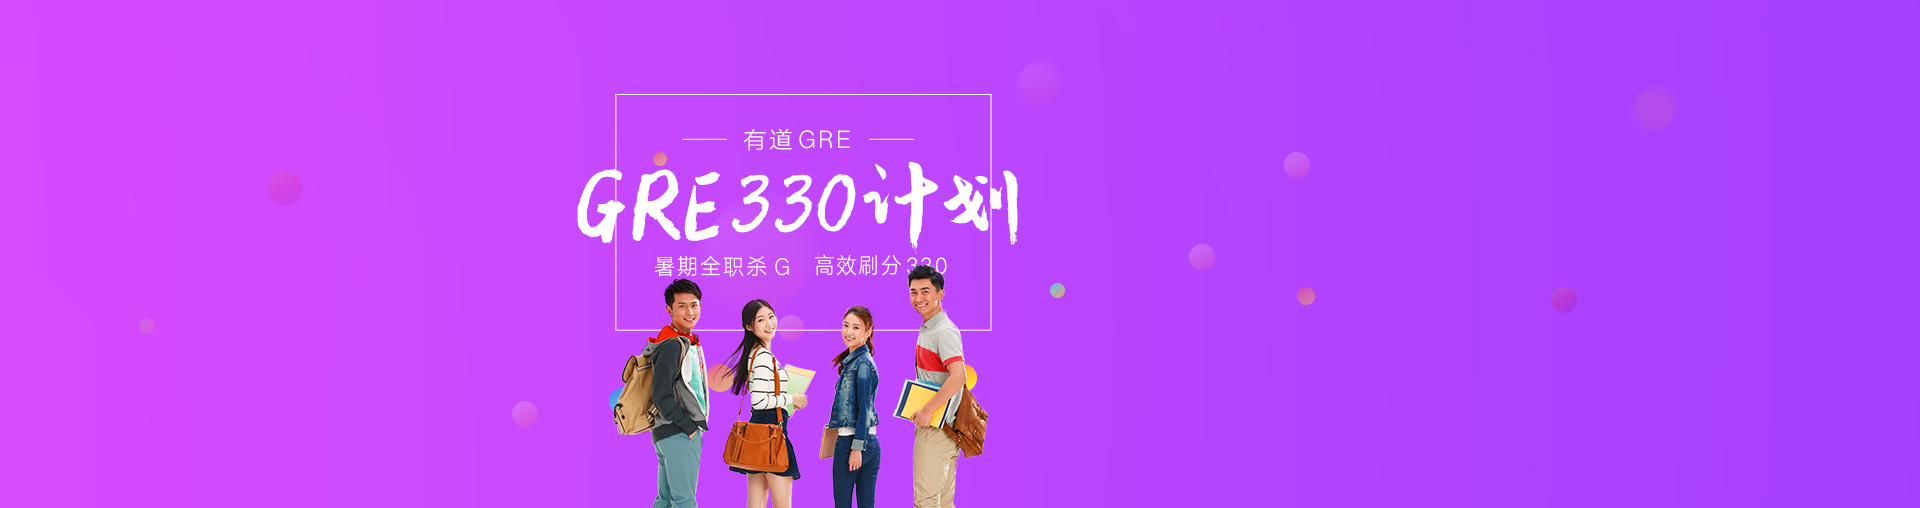 GRE7-8月330计划